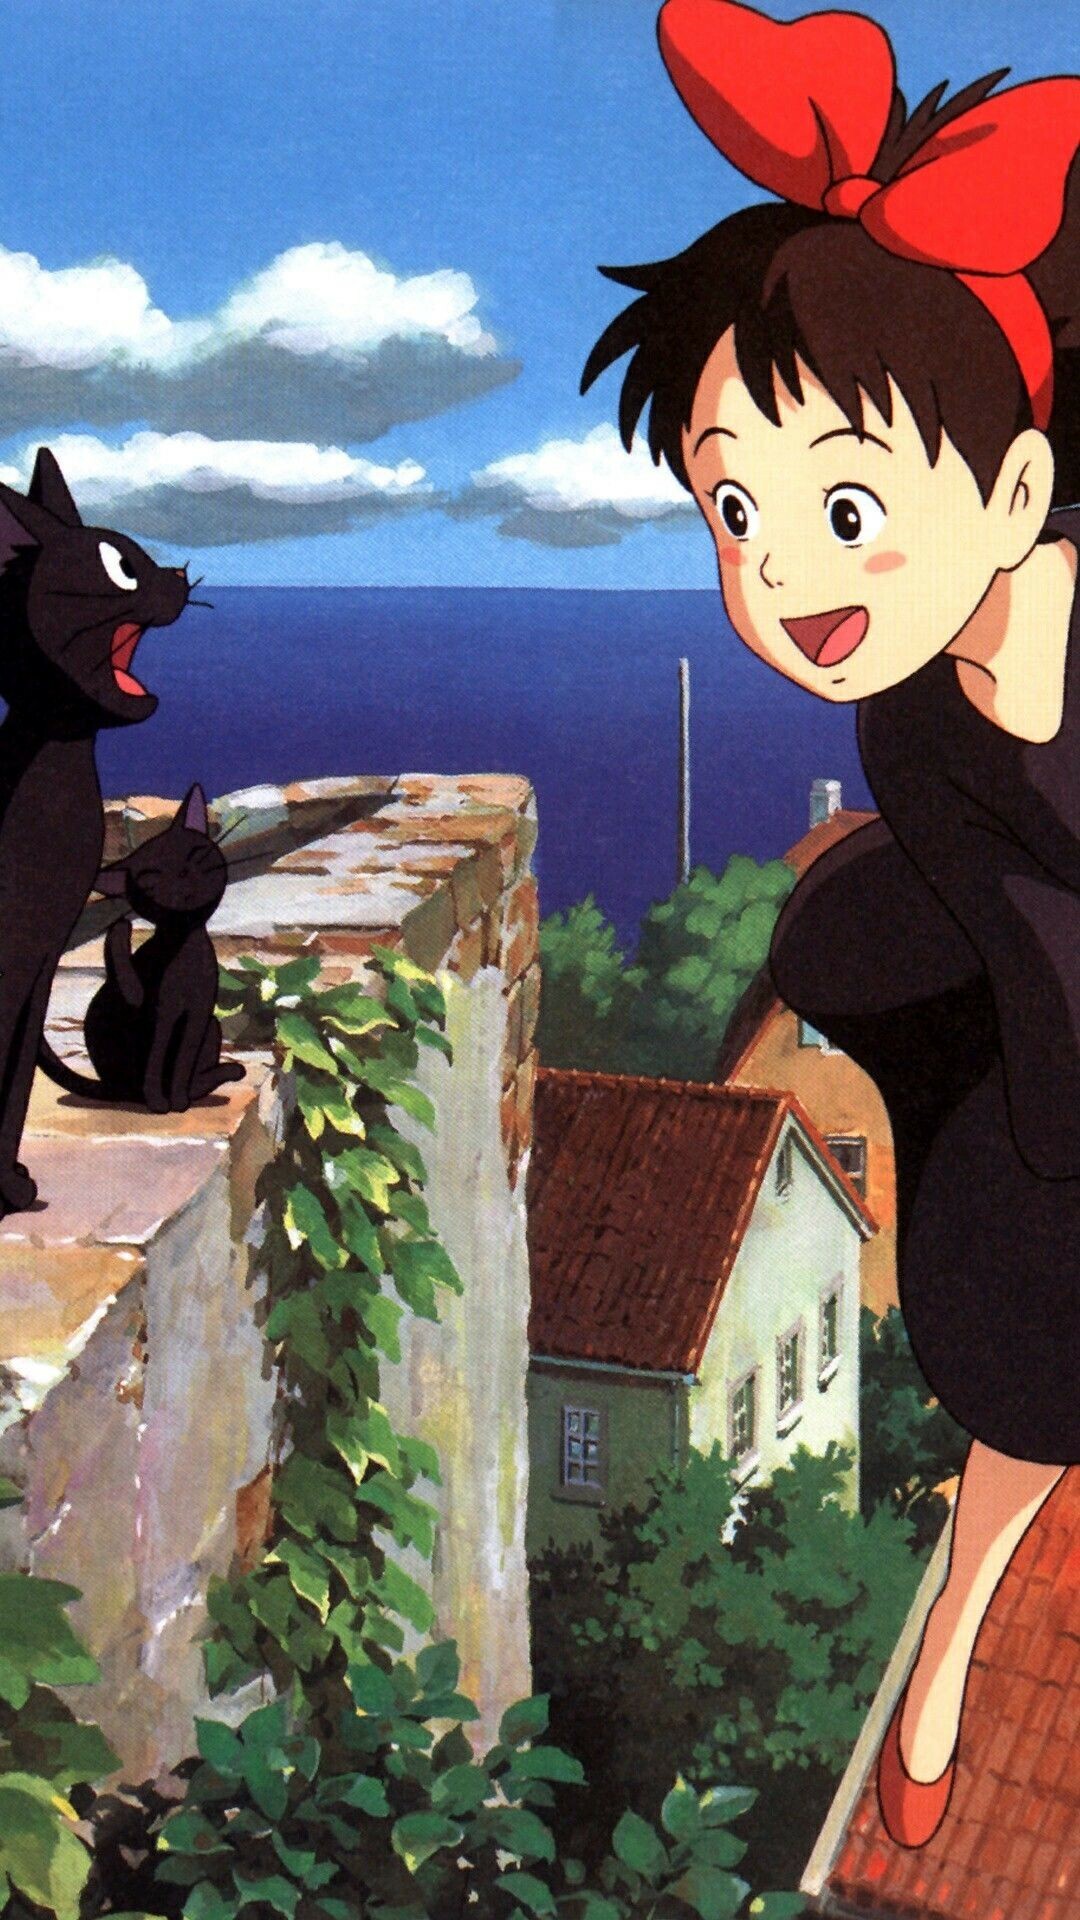 Kiki's Delivery Service: The main protagonist takes off for the big city with her best friend Jiji, a talkative black cat. 1080x1920 Full HD Wallpaper.